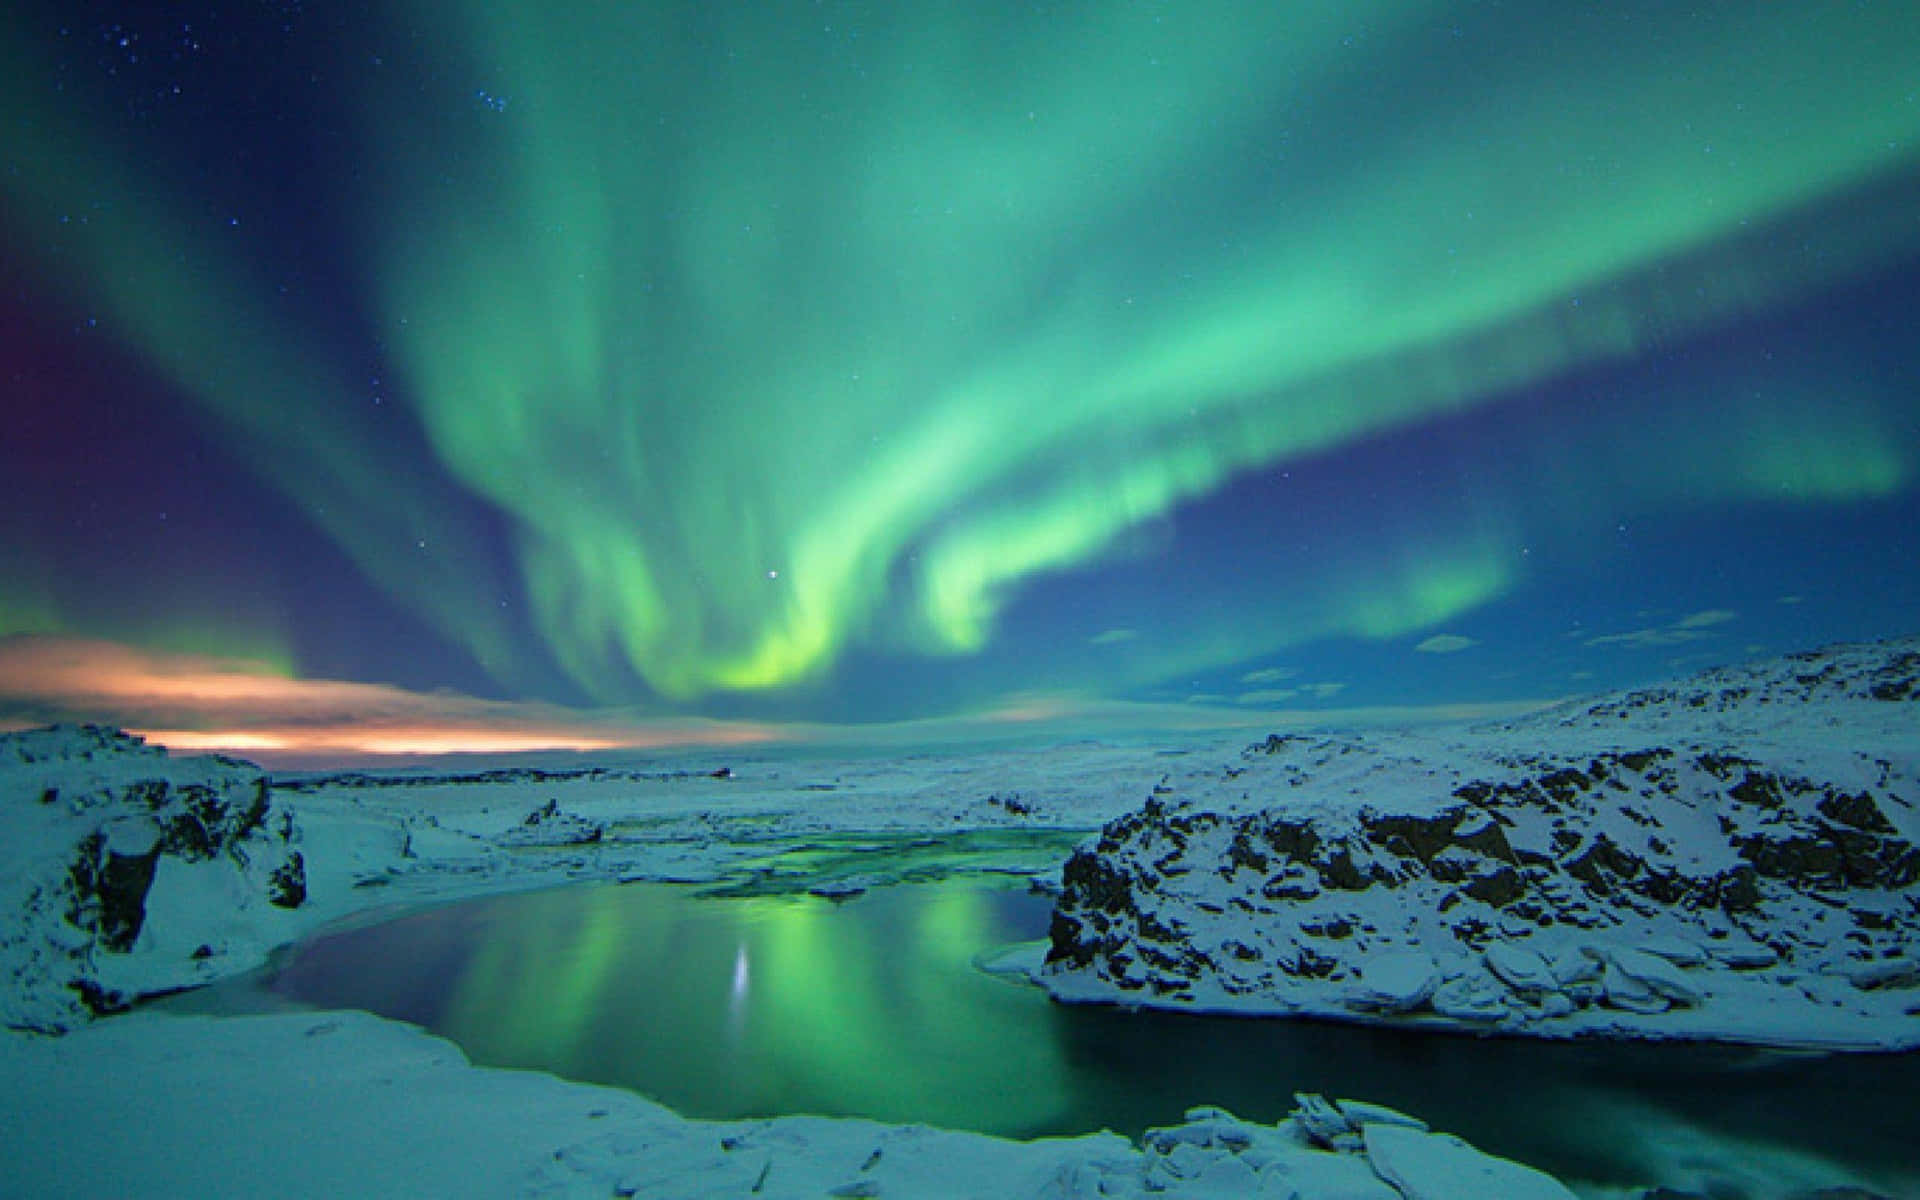 The enchanting spectacle of the Northern Lights in full bloom